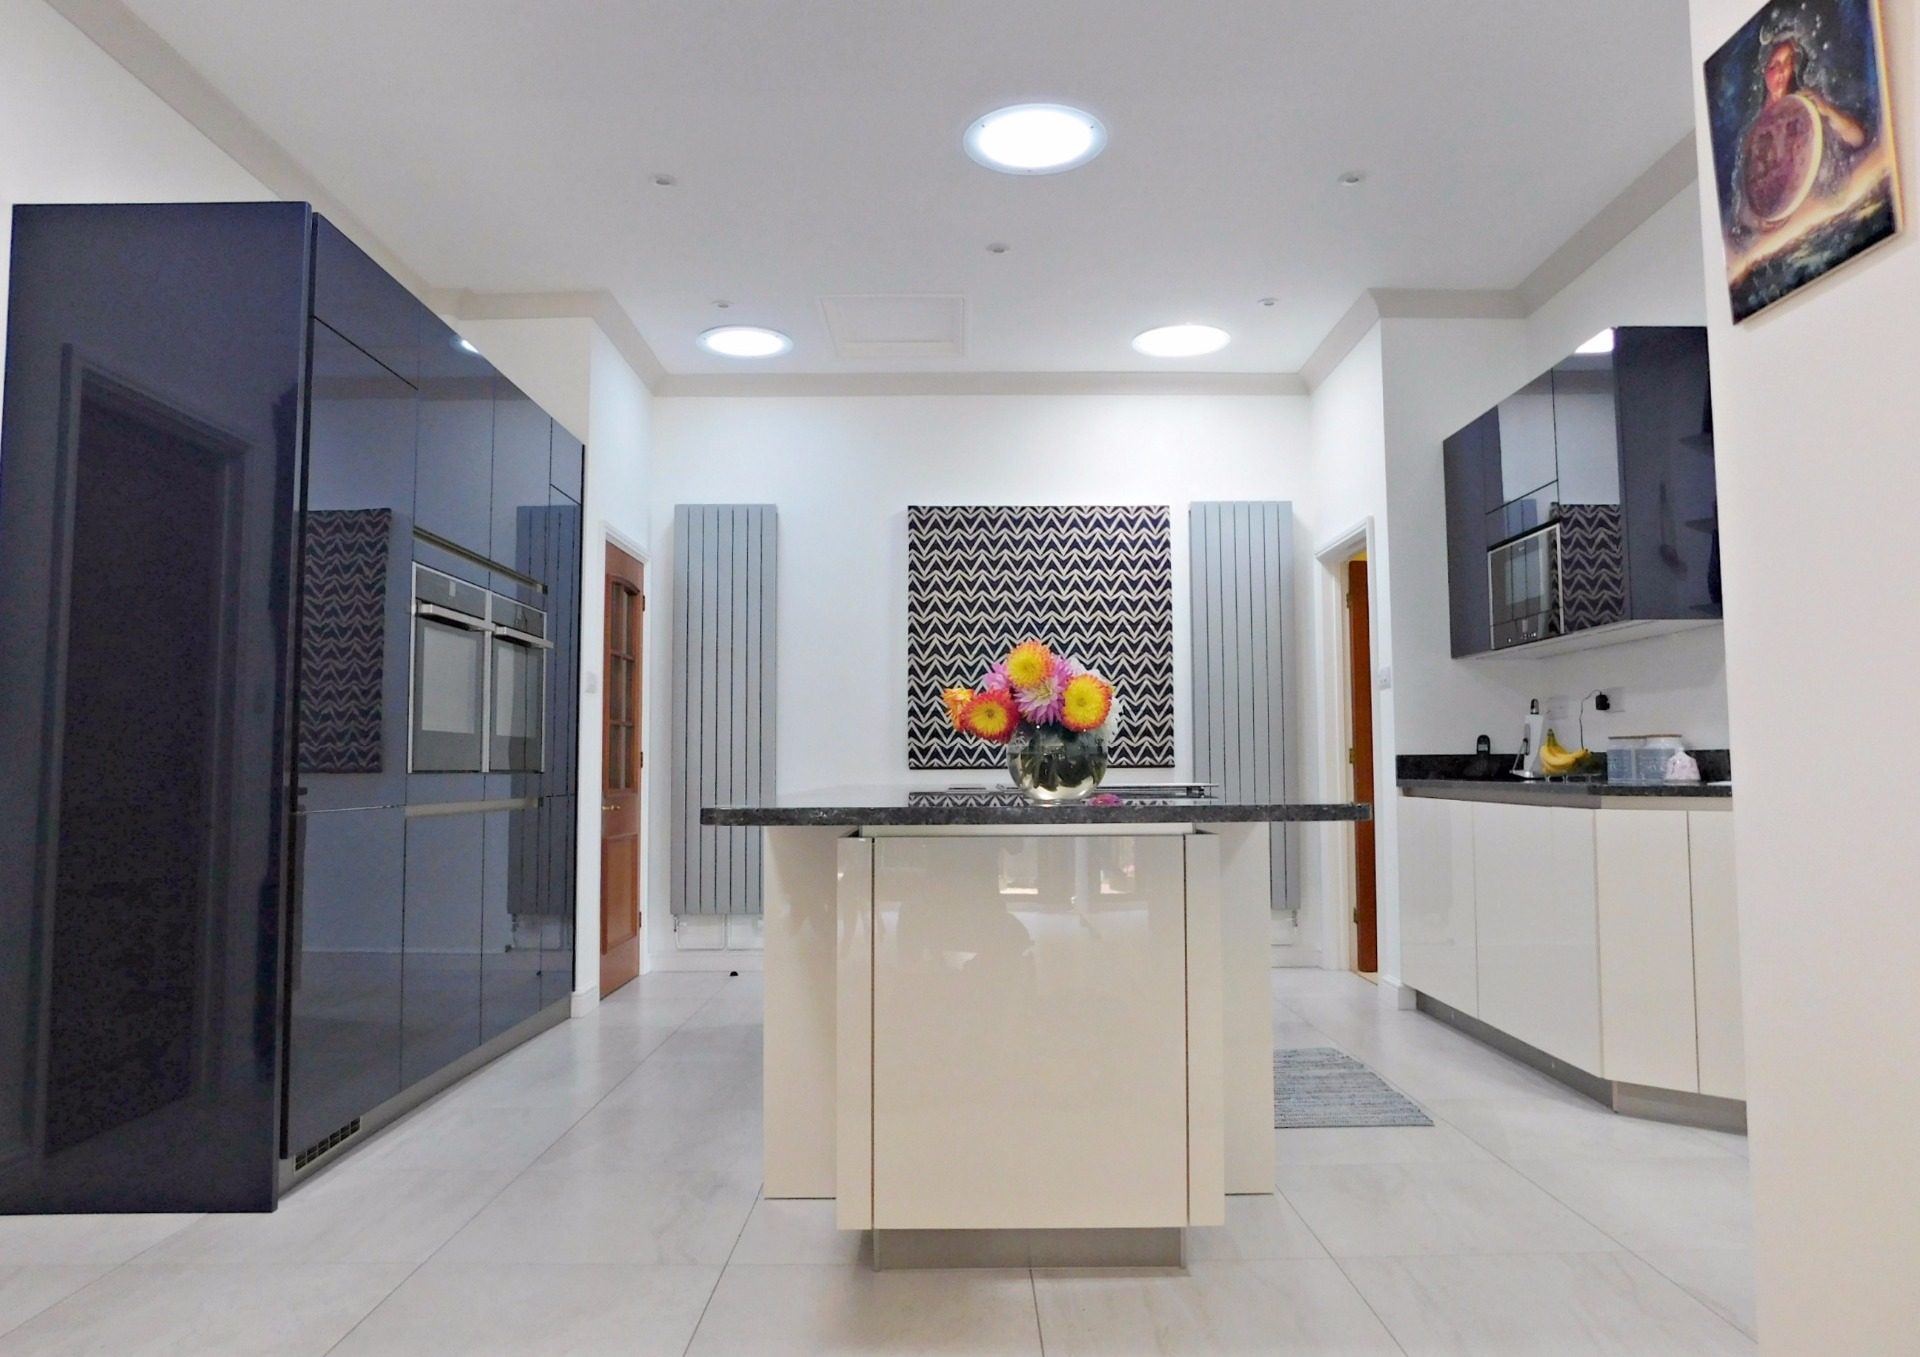 The kitchen build with 5 daylighting systems